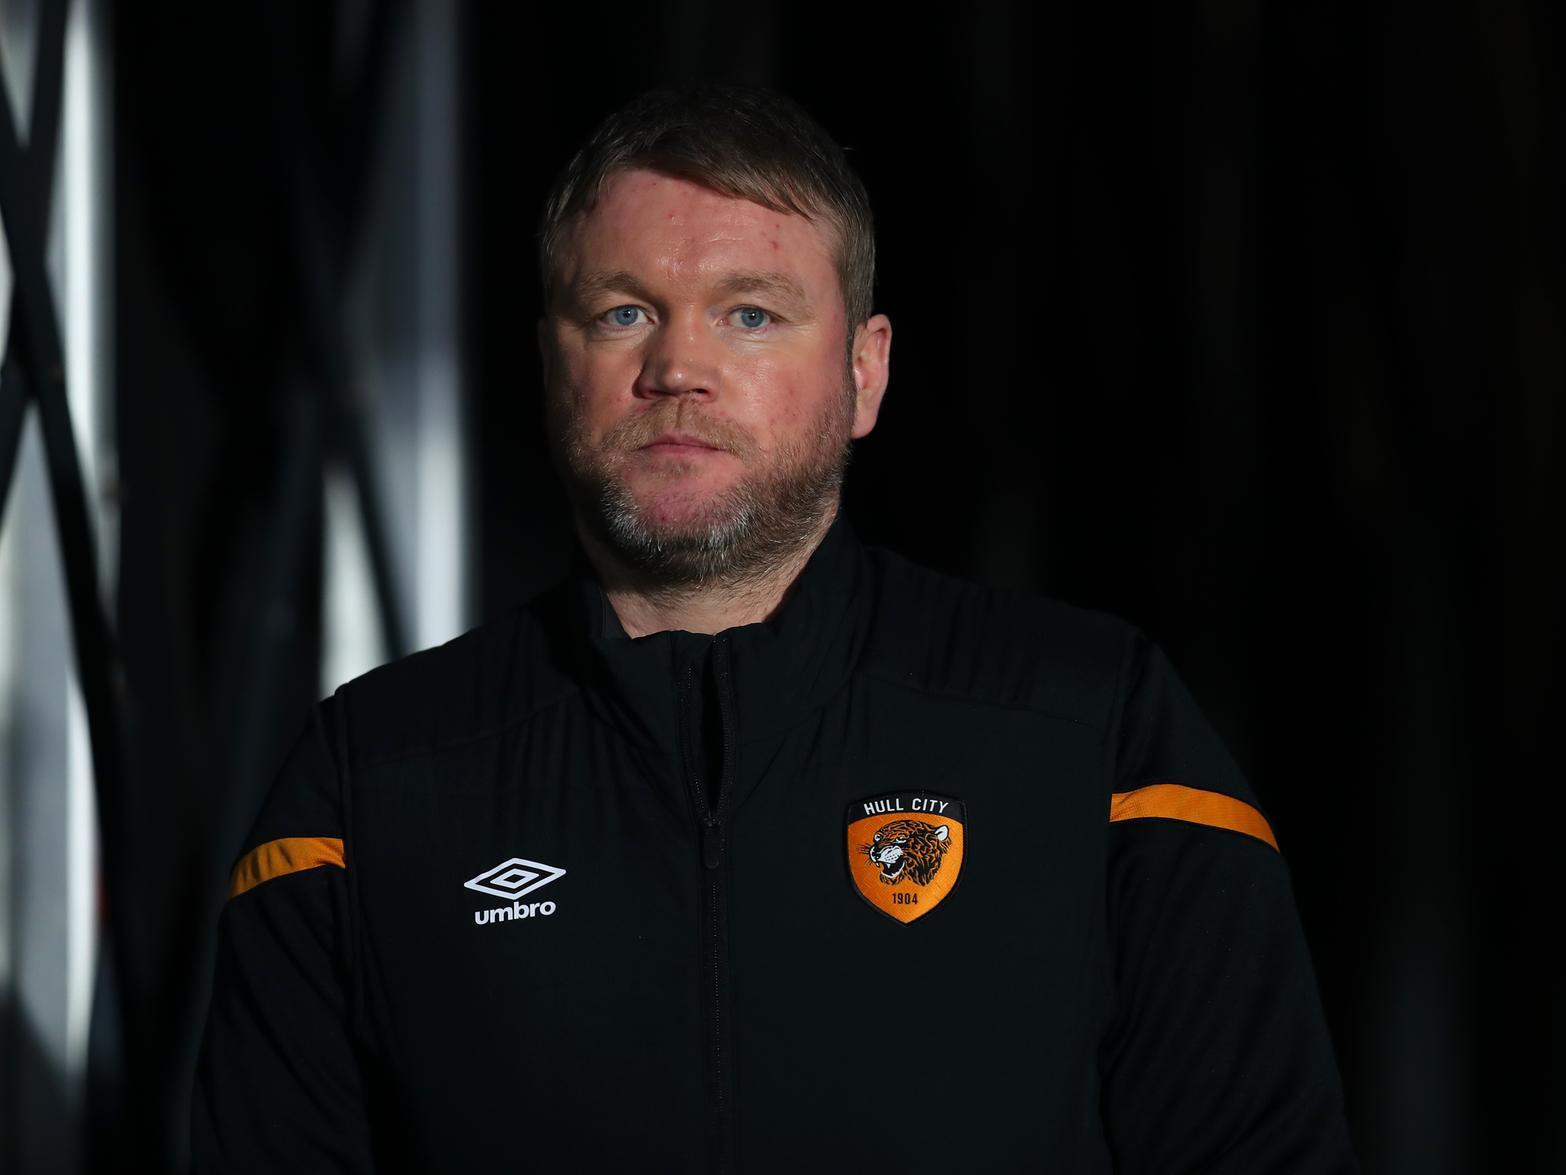 Hull City boss Grant McCann has revealed that key player Tom Eaves suffered a "serious" injury against Preston last weekend, and condemned the match officials for not penalising the tackle. (Hull Daily Mail)